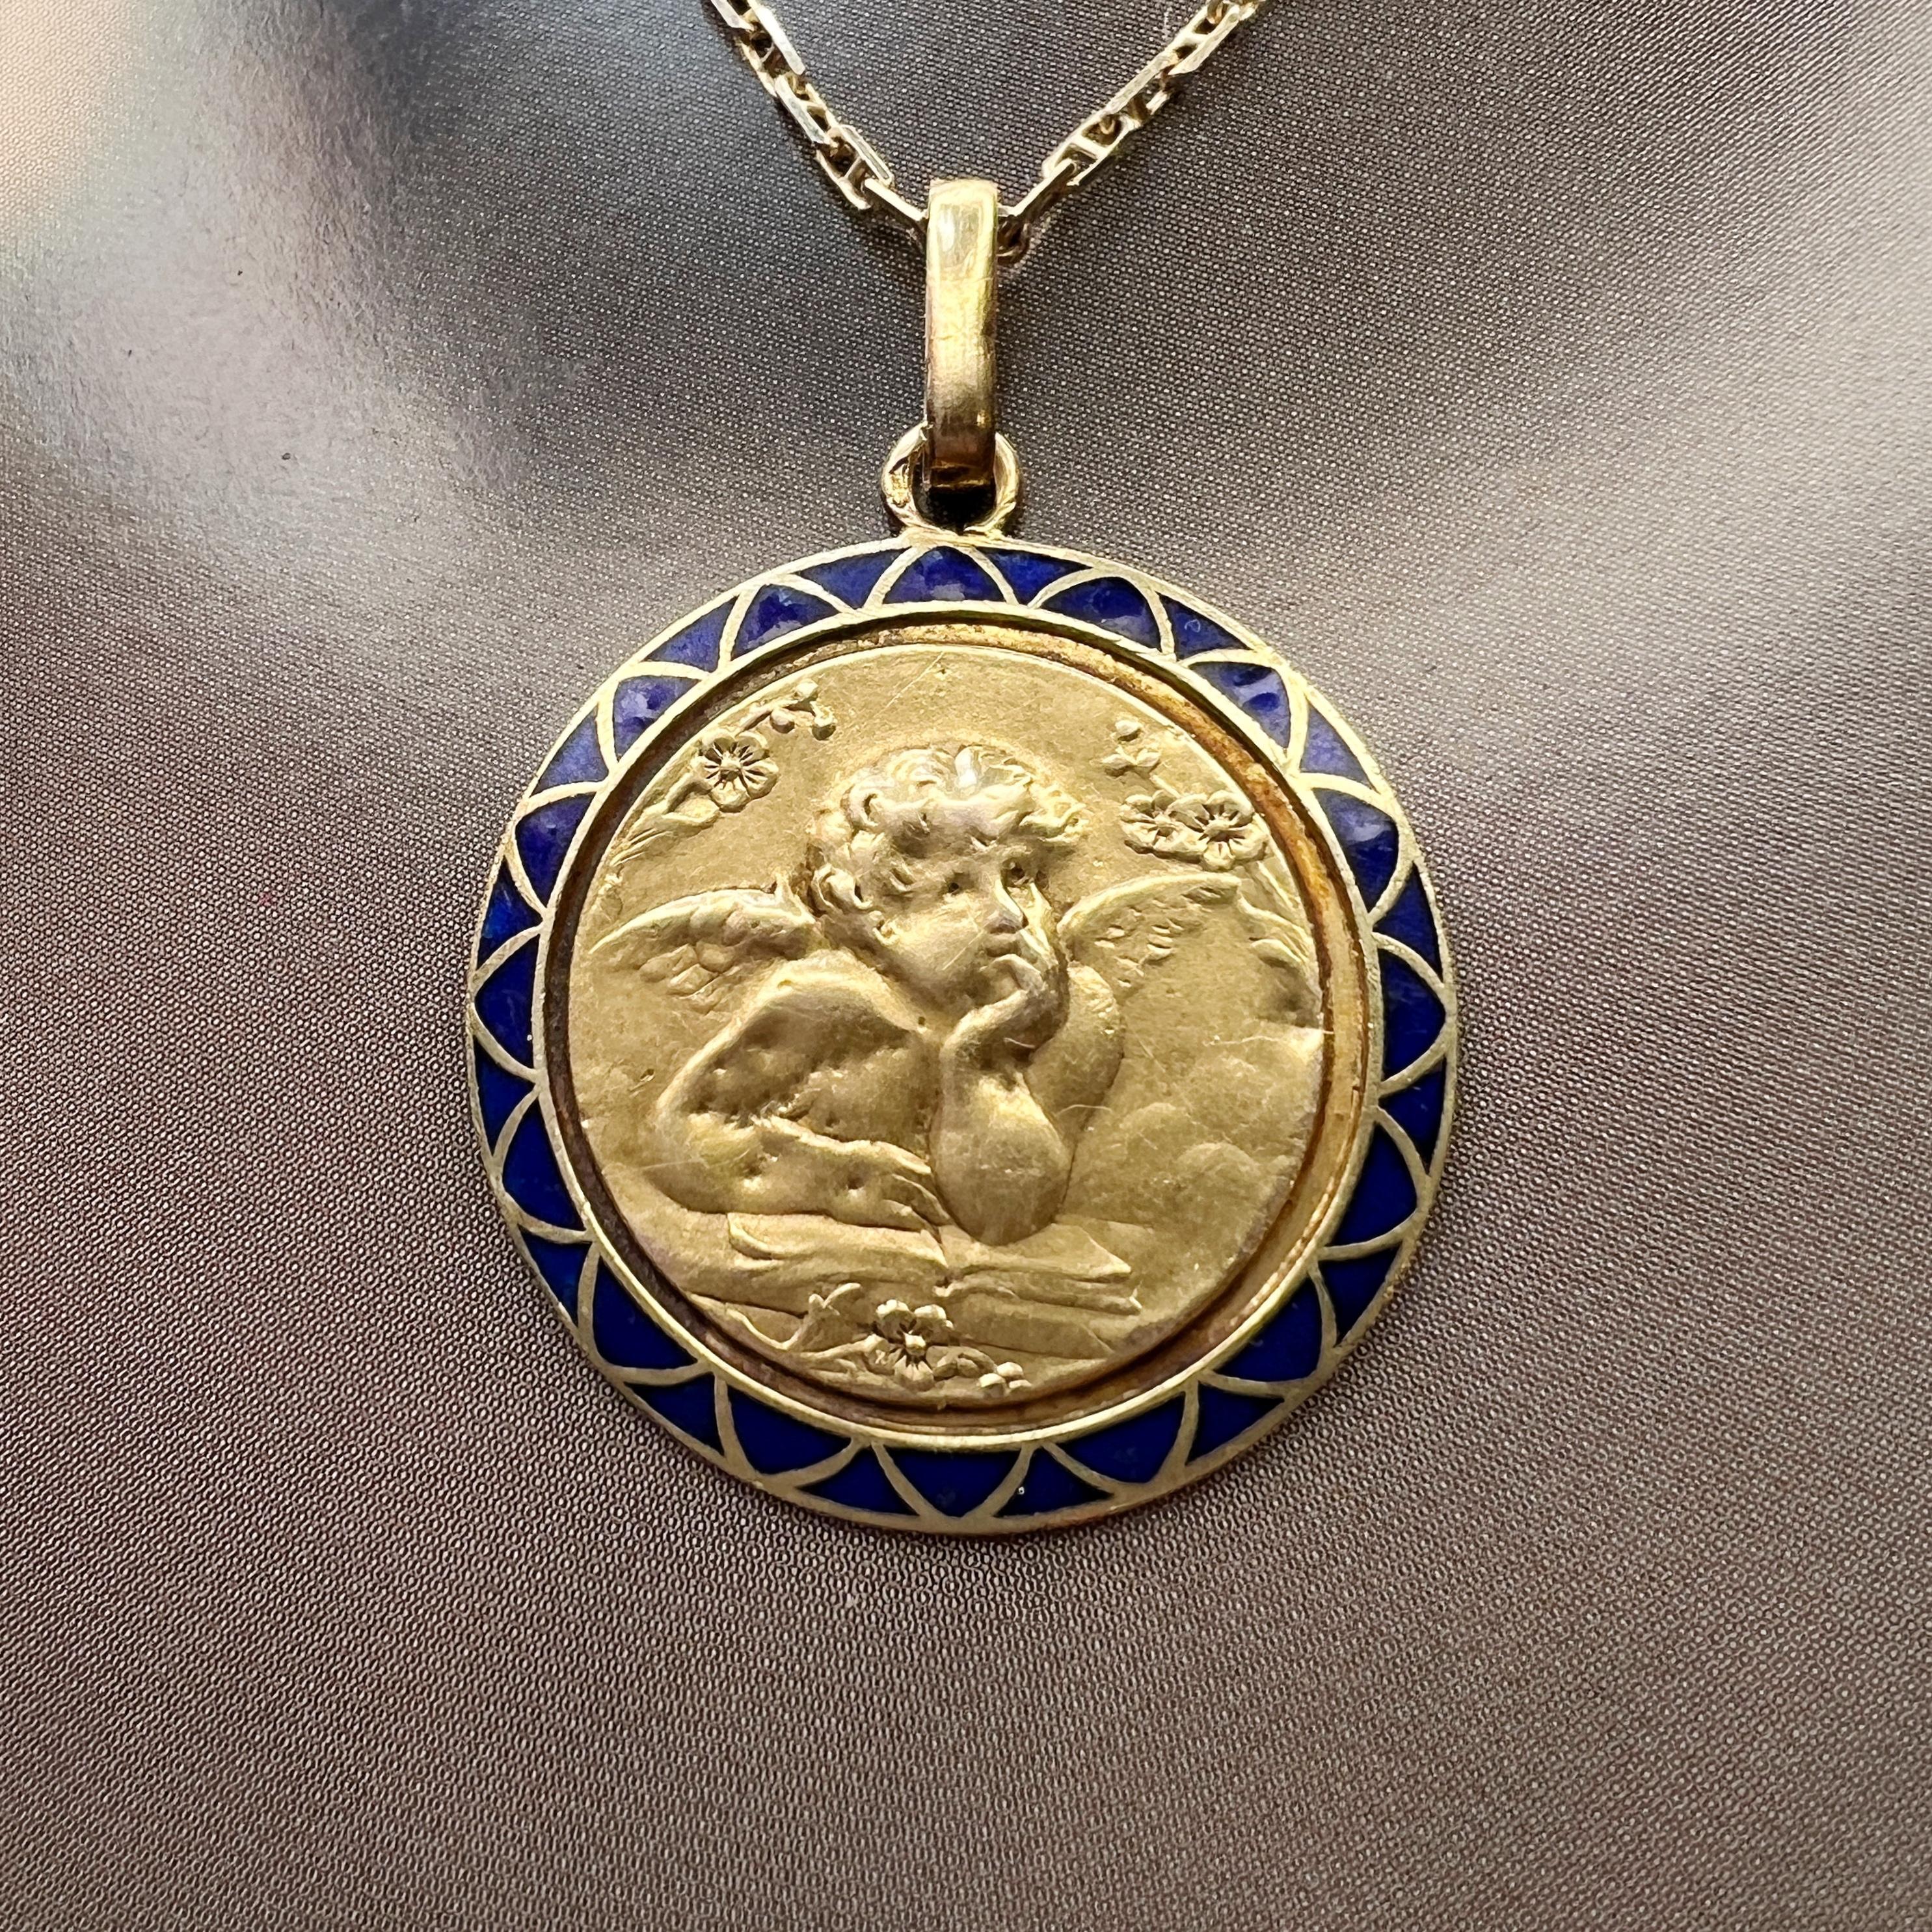 For sale an antique 18K gold pendant which pays homage to the iconic cherubs from Raphael's renowned painting, 